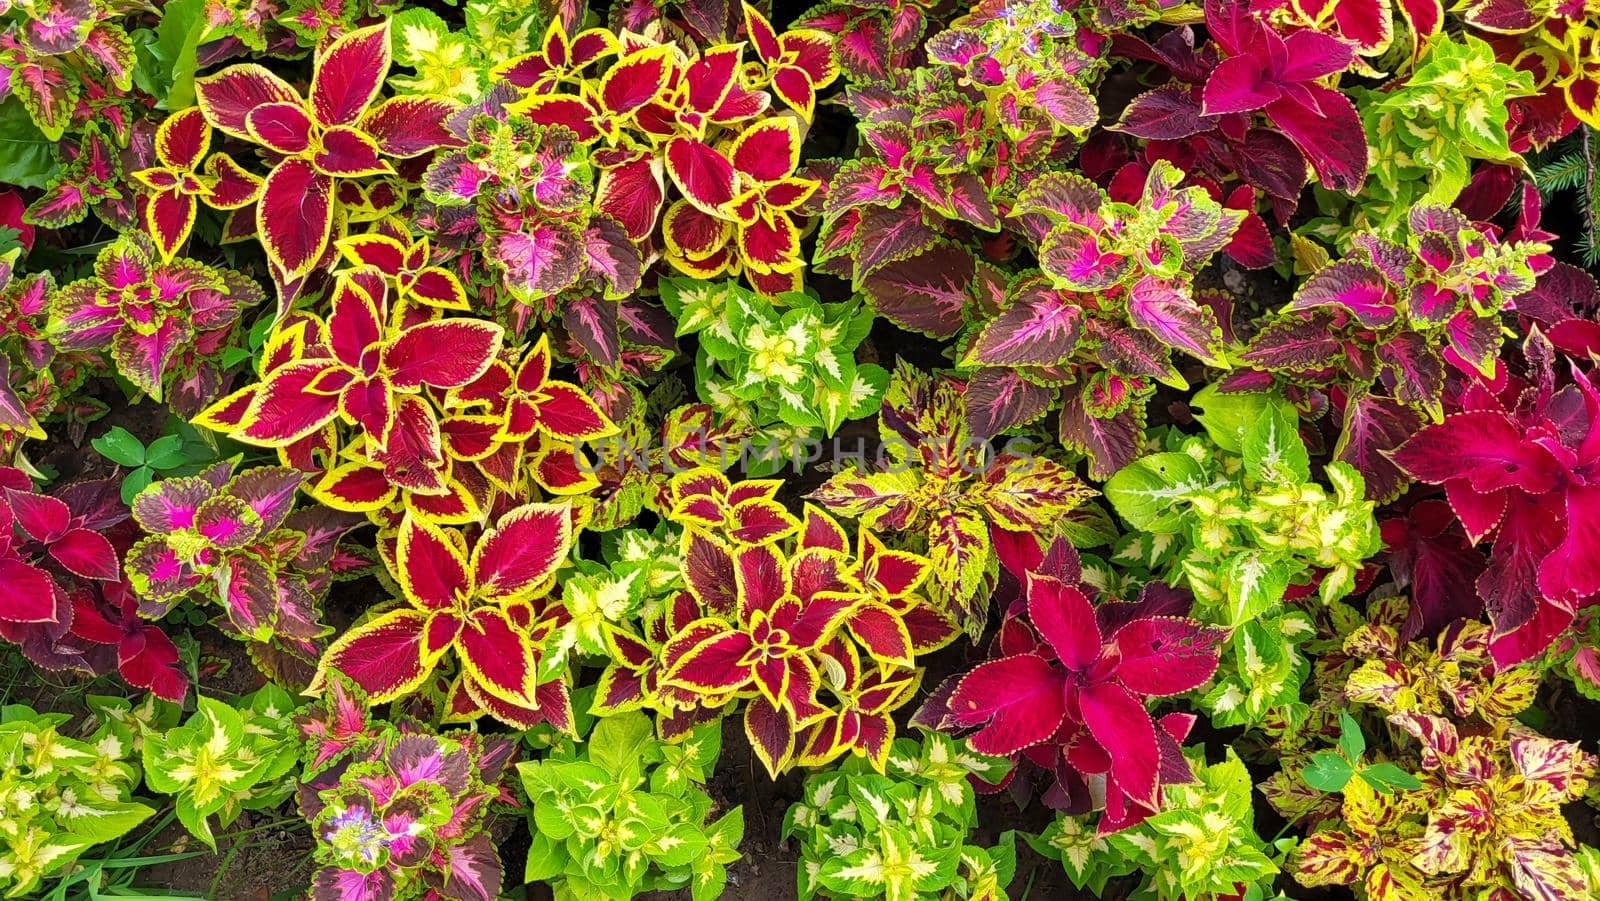 Large beautiful leaves of coleus multicolored bright sunny day by lapushka62